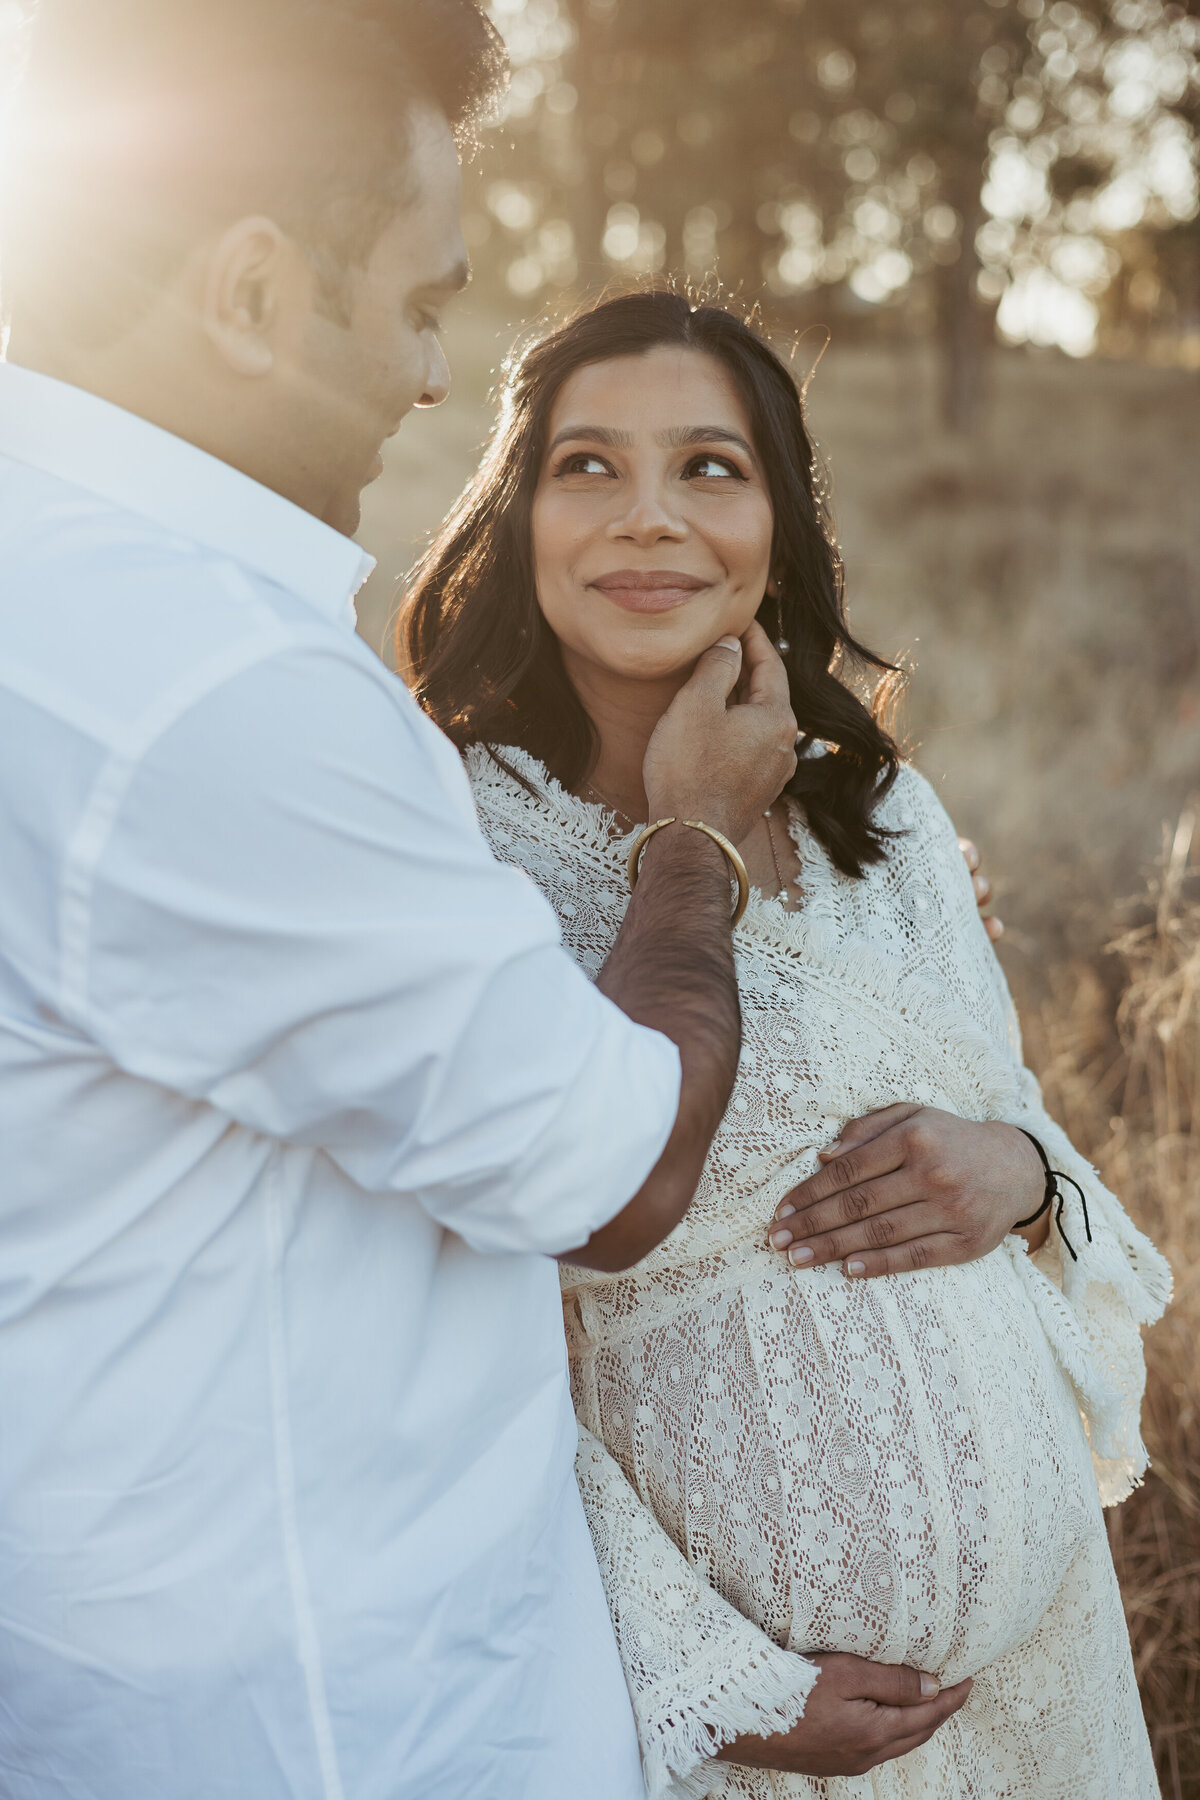 Dad-to-be casually grazing his wife's cheek  while she looks up at him and holds her baby bump